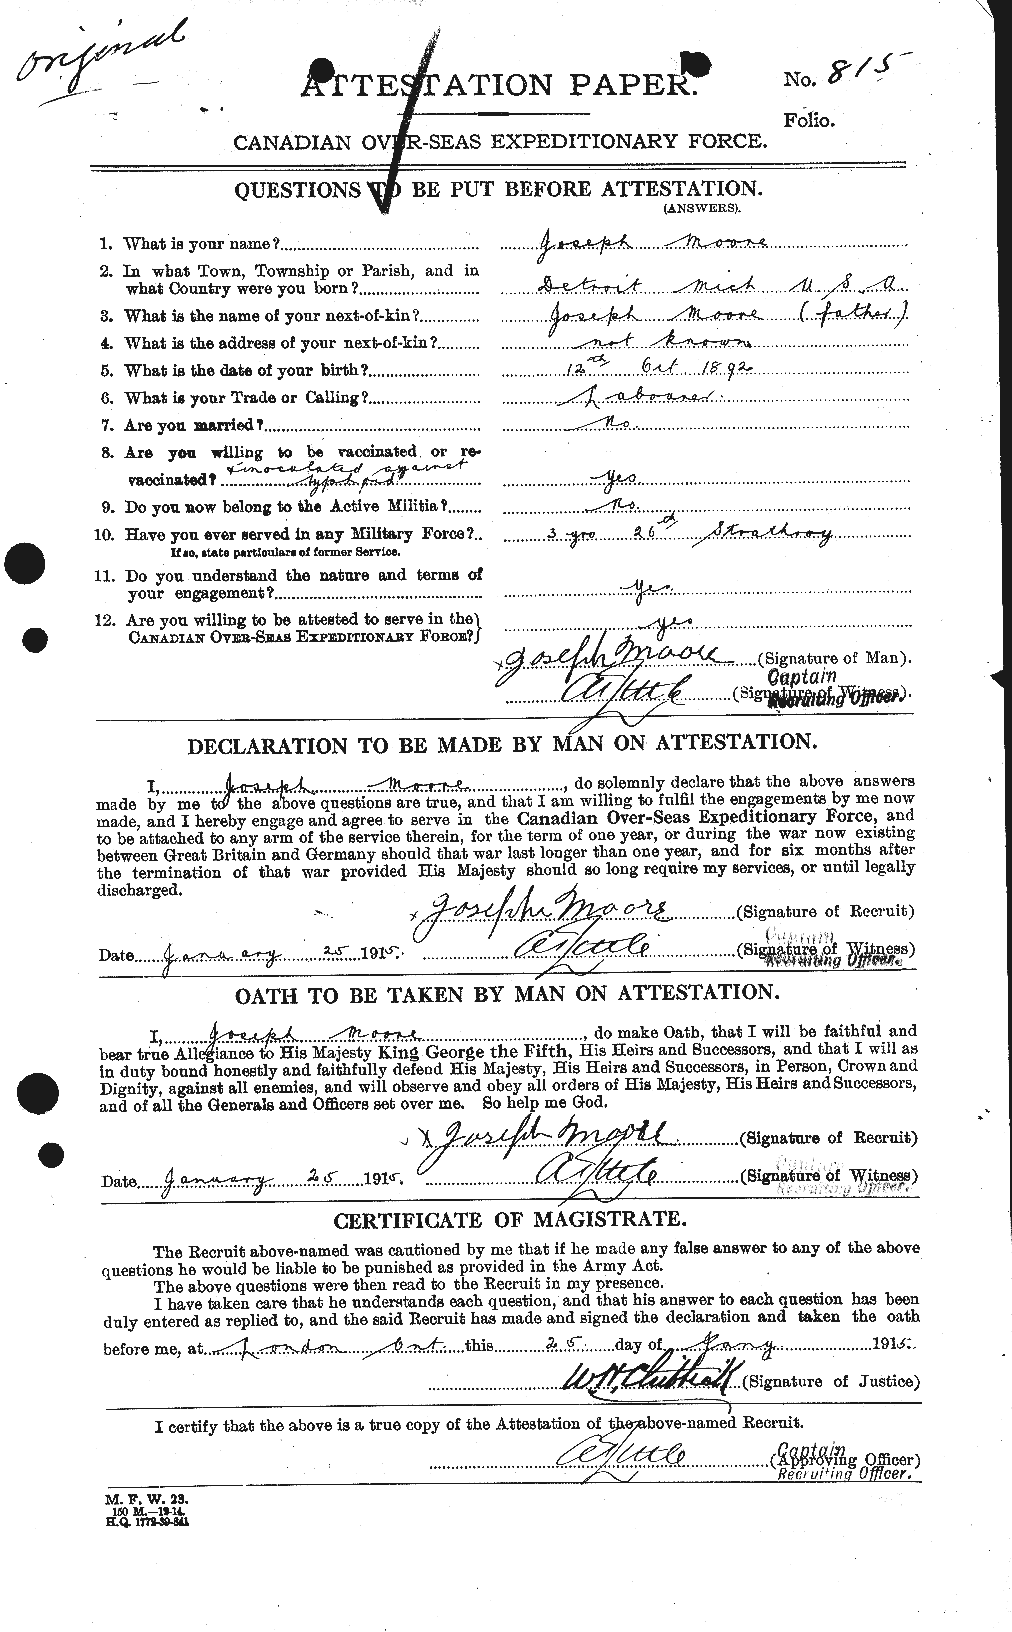 Personnel Records of the First World War - CEF 503361a